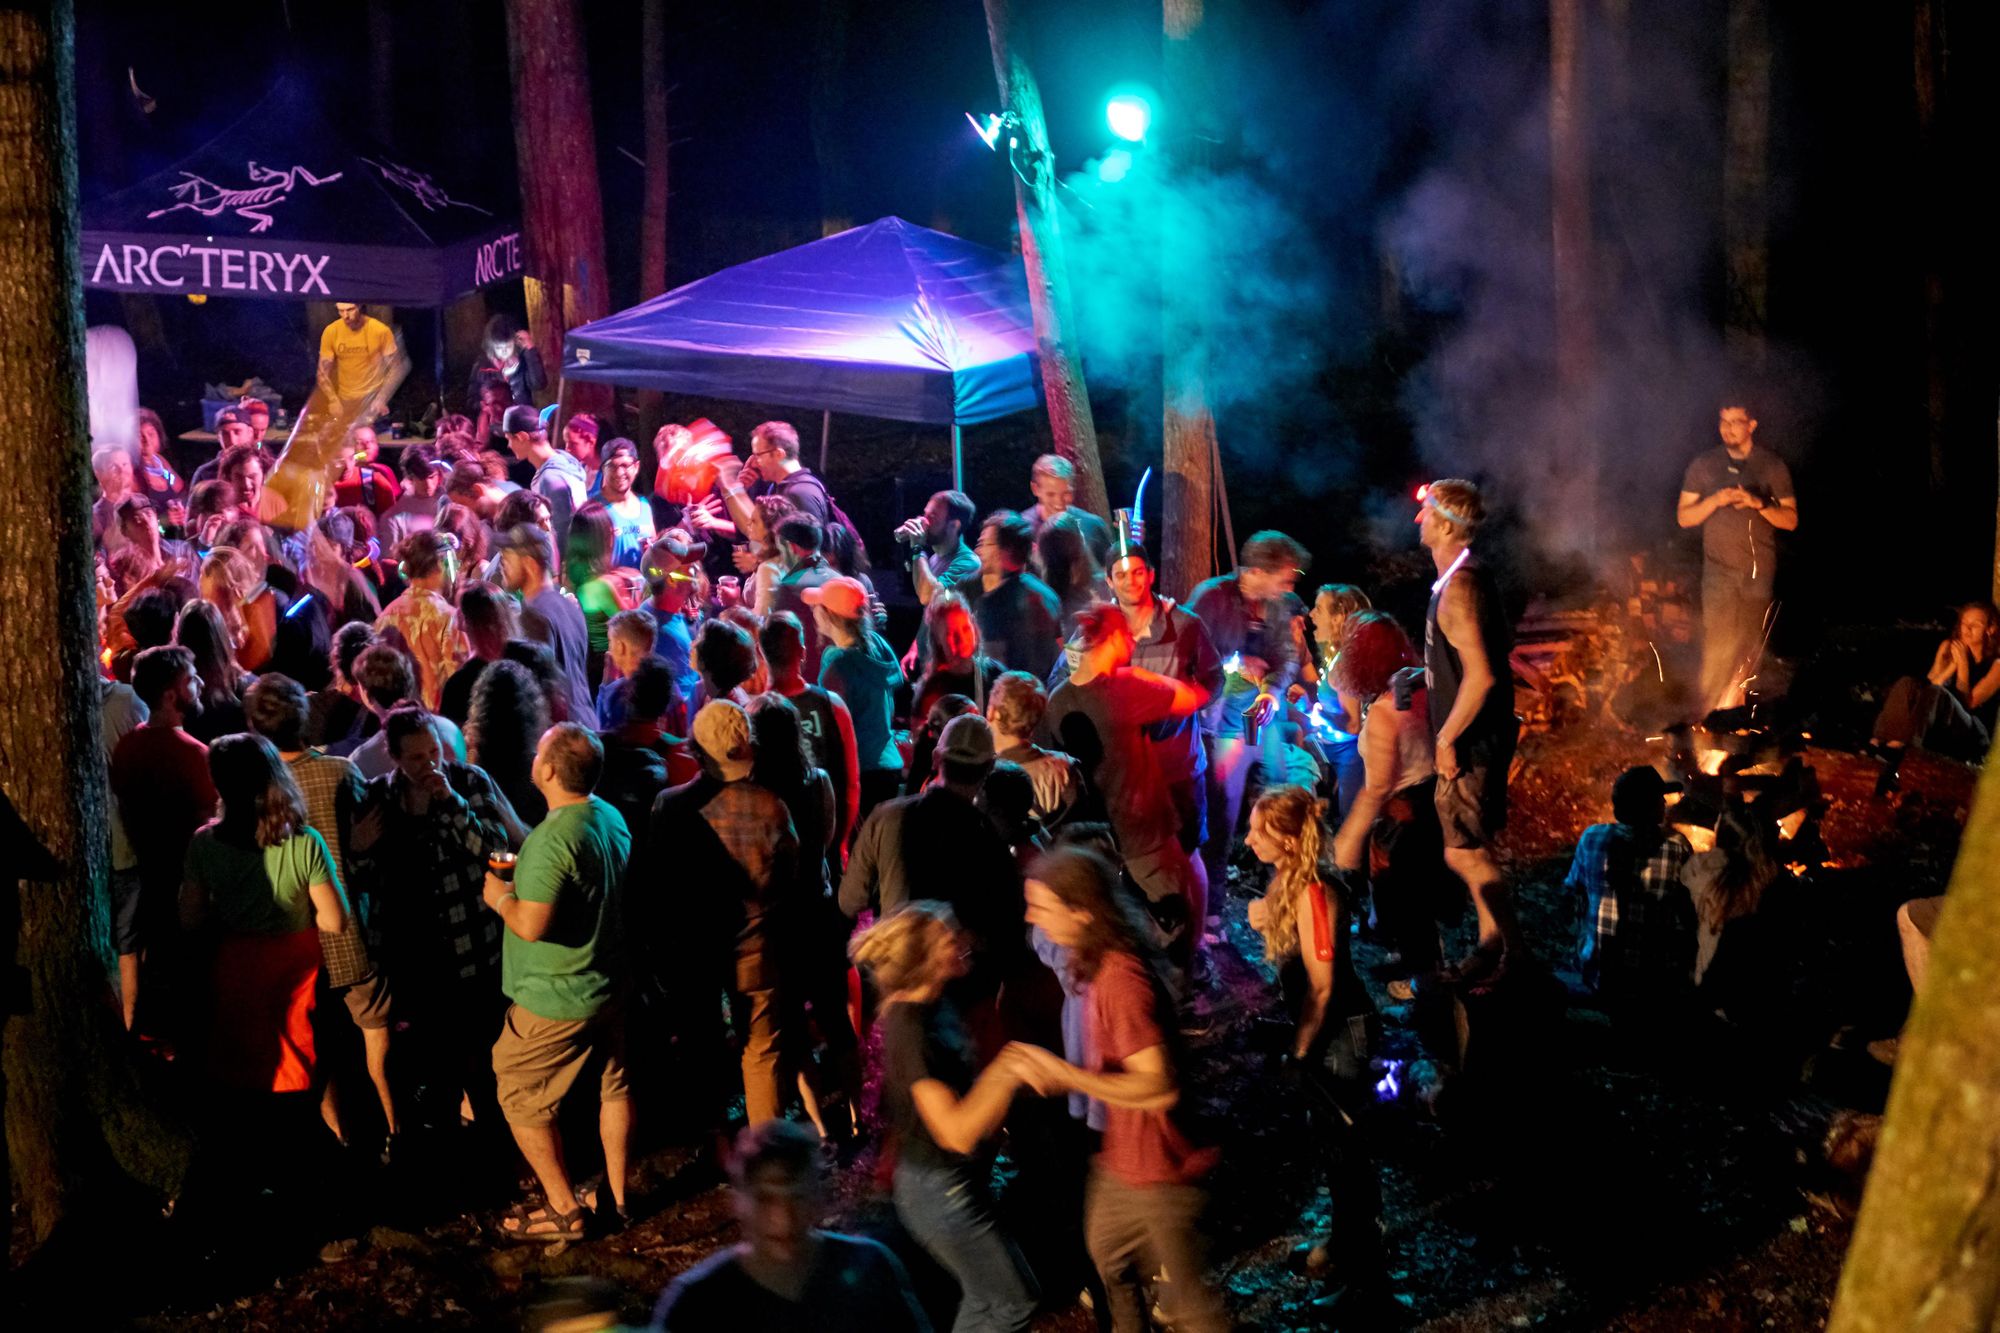 Party outside at night with smoke and colored lights.